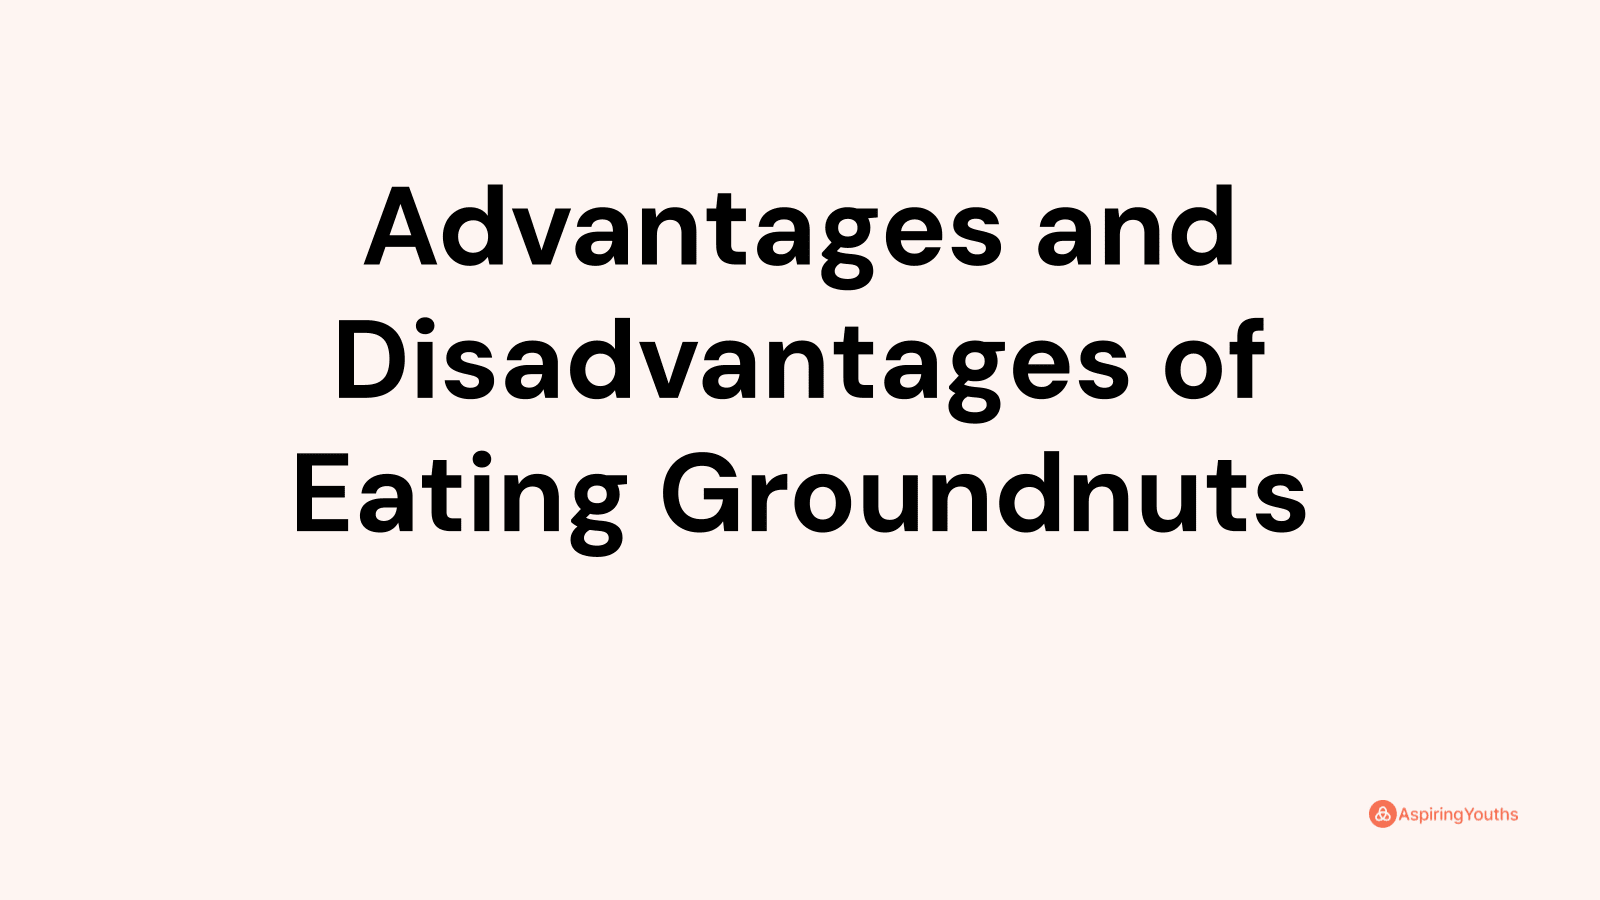 Advantages and disadvantages of Eating Groundnuts